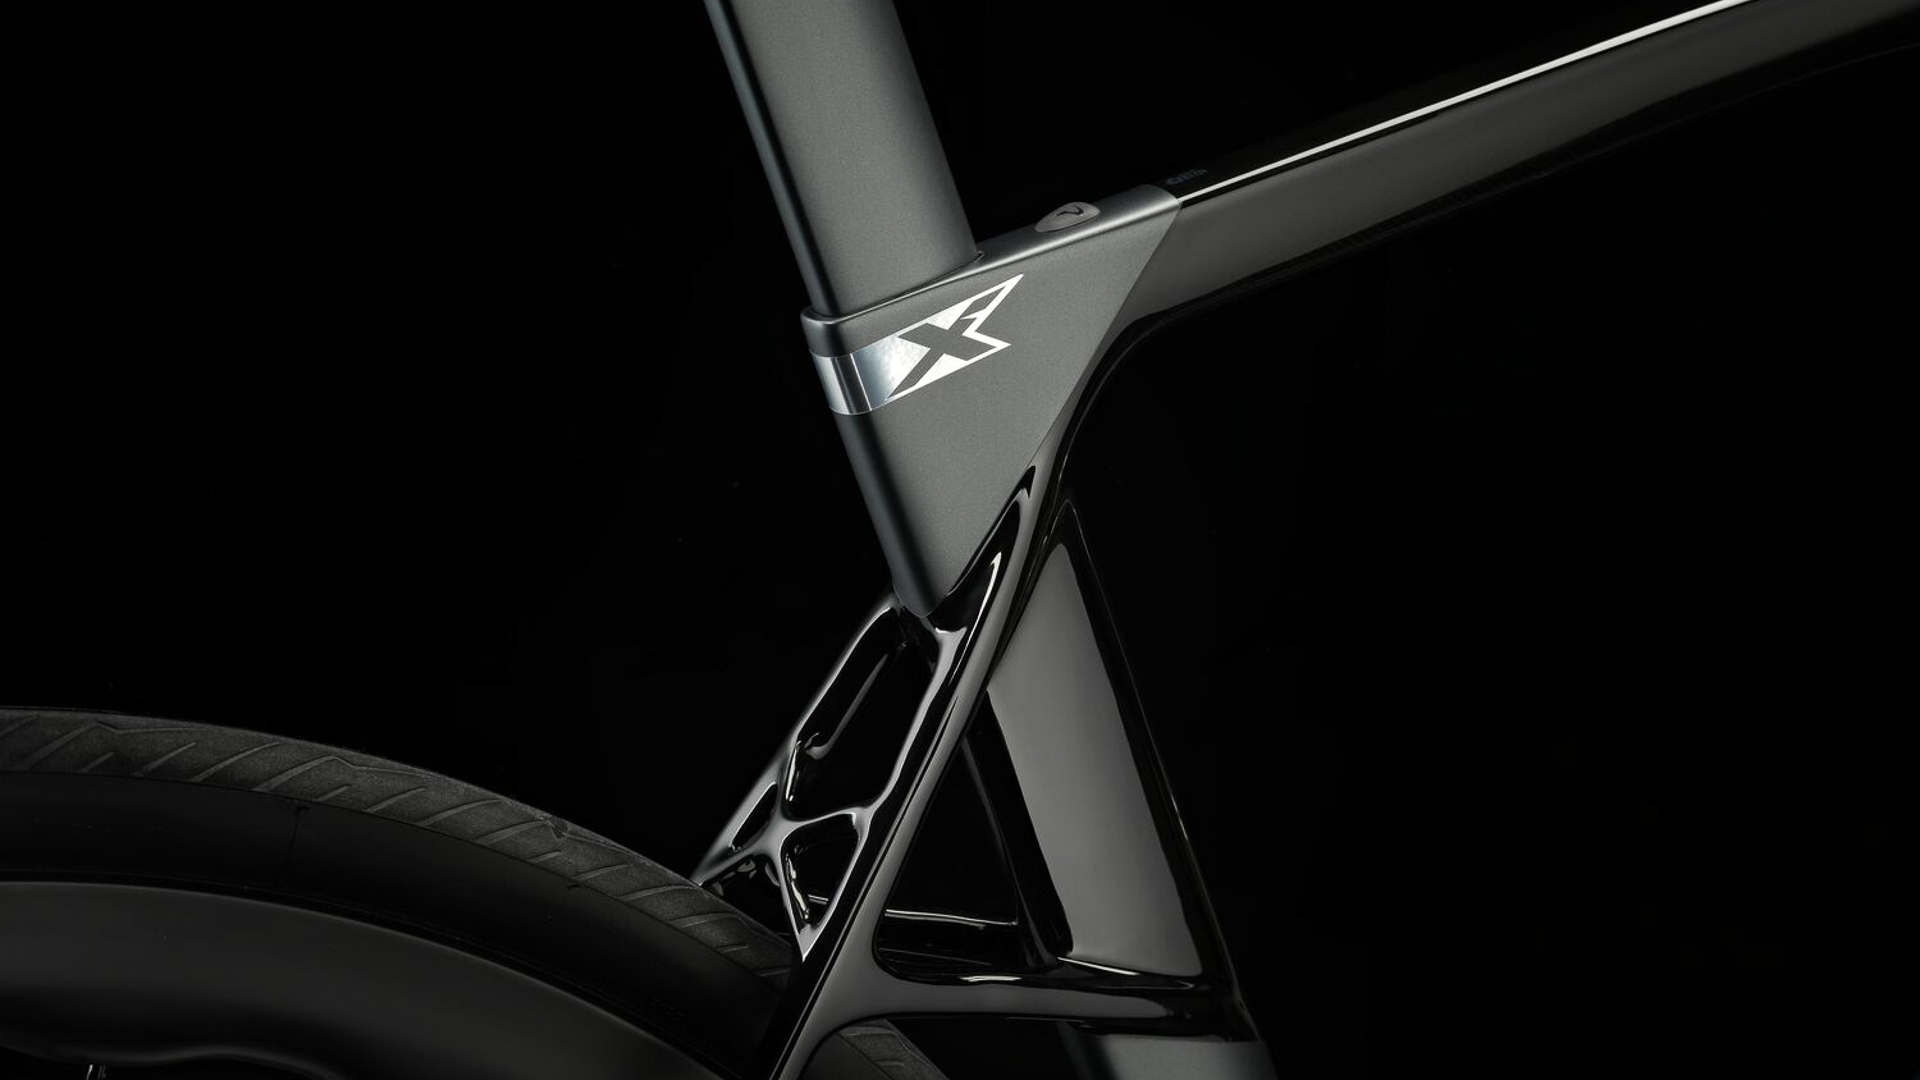 The seat tube and seat stay intersection area on the new Dogma X. The new X logo on the side of the seat tube near the top is central in the image, but the image also shows the new dual attachment configuration of the seat stays and the X-bridge connecting the two independent seat stays. 